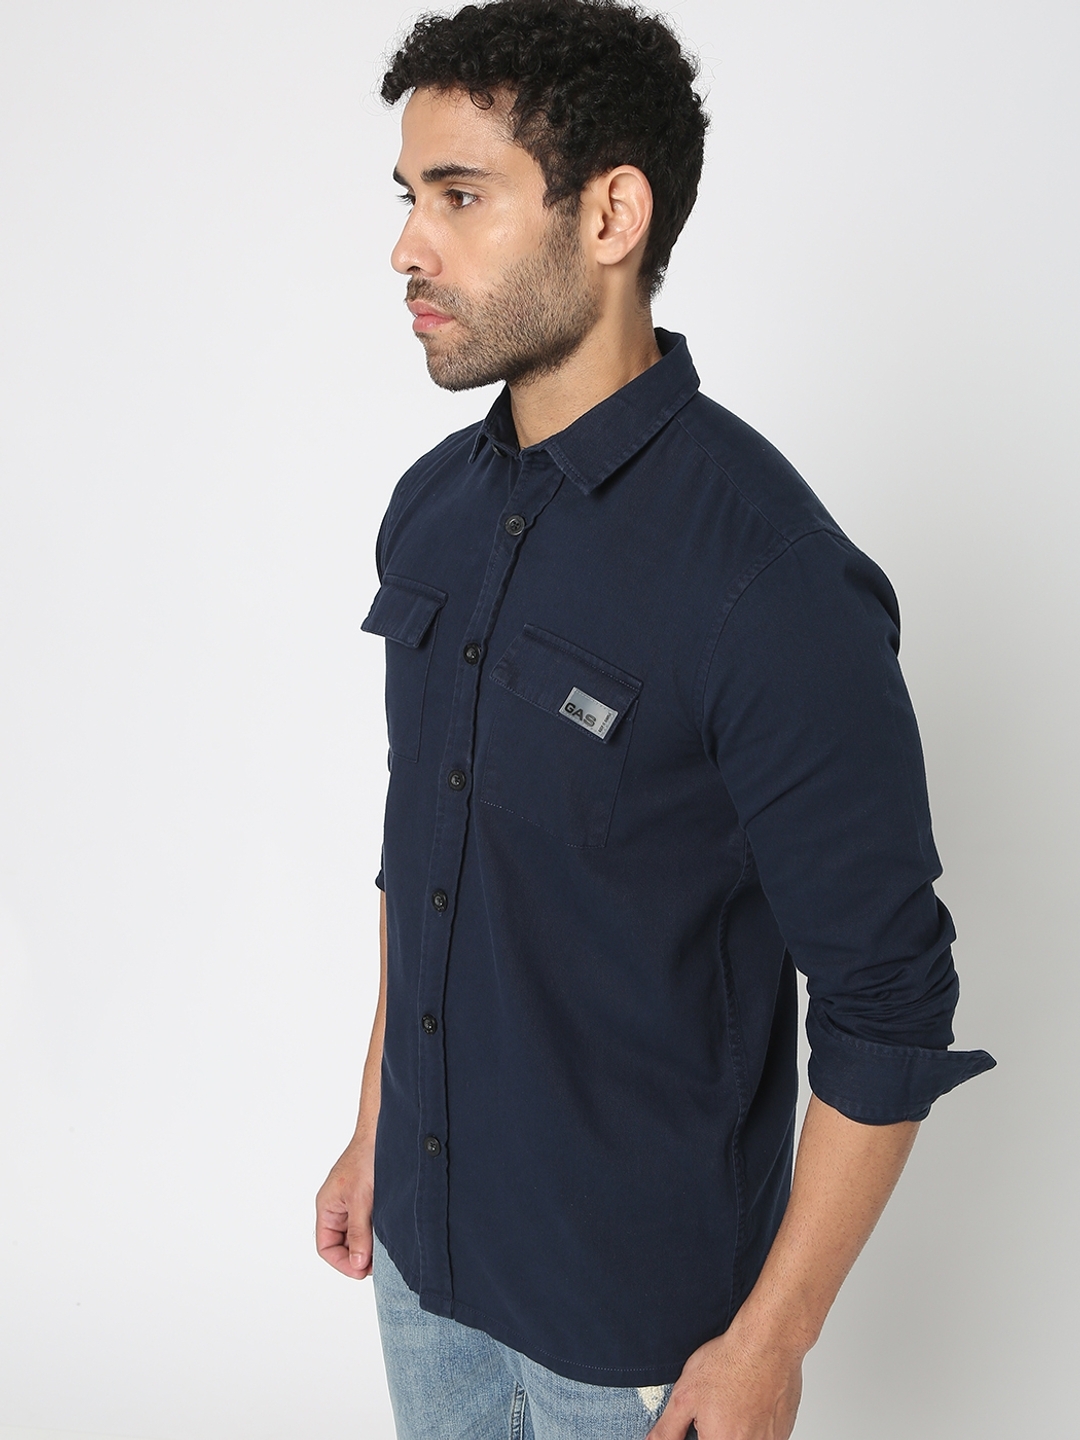 Buy GAS Blue Solid Denim Slim Fit Mens Casual Shirt | Shoppers Stop